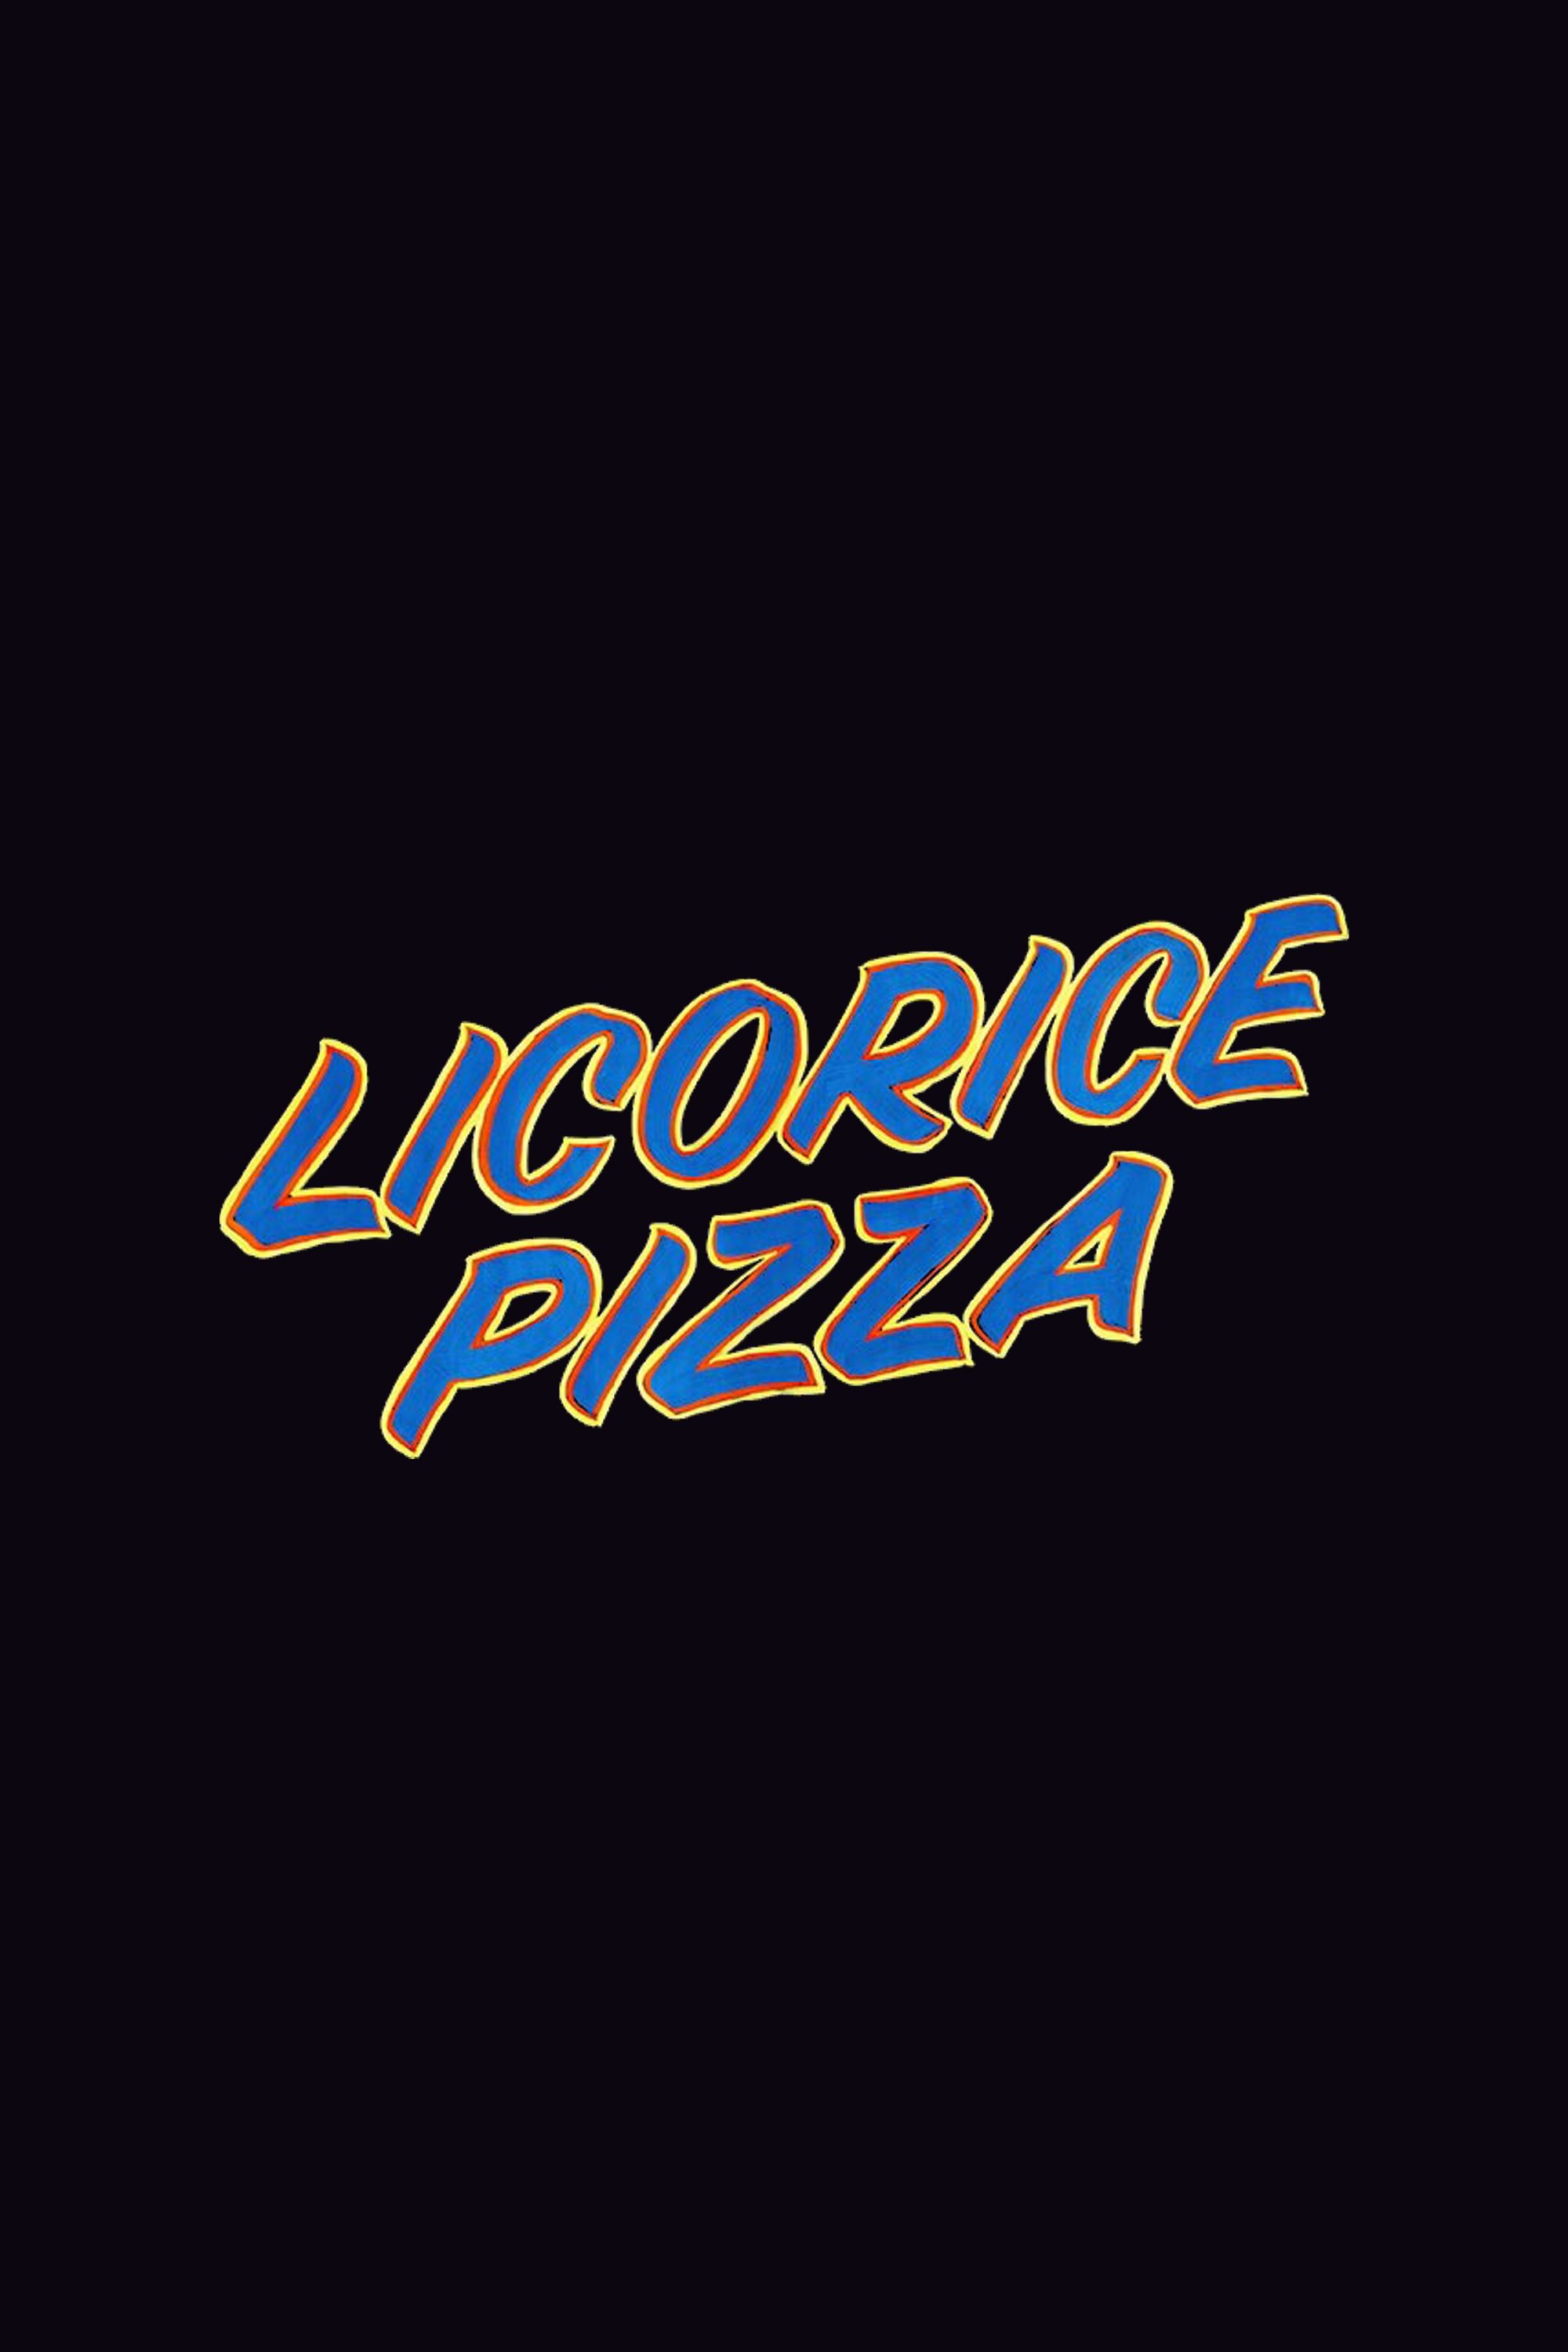 A black background with the words Licorice Pizza in blue and yellow - Pizza